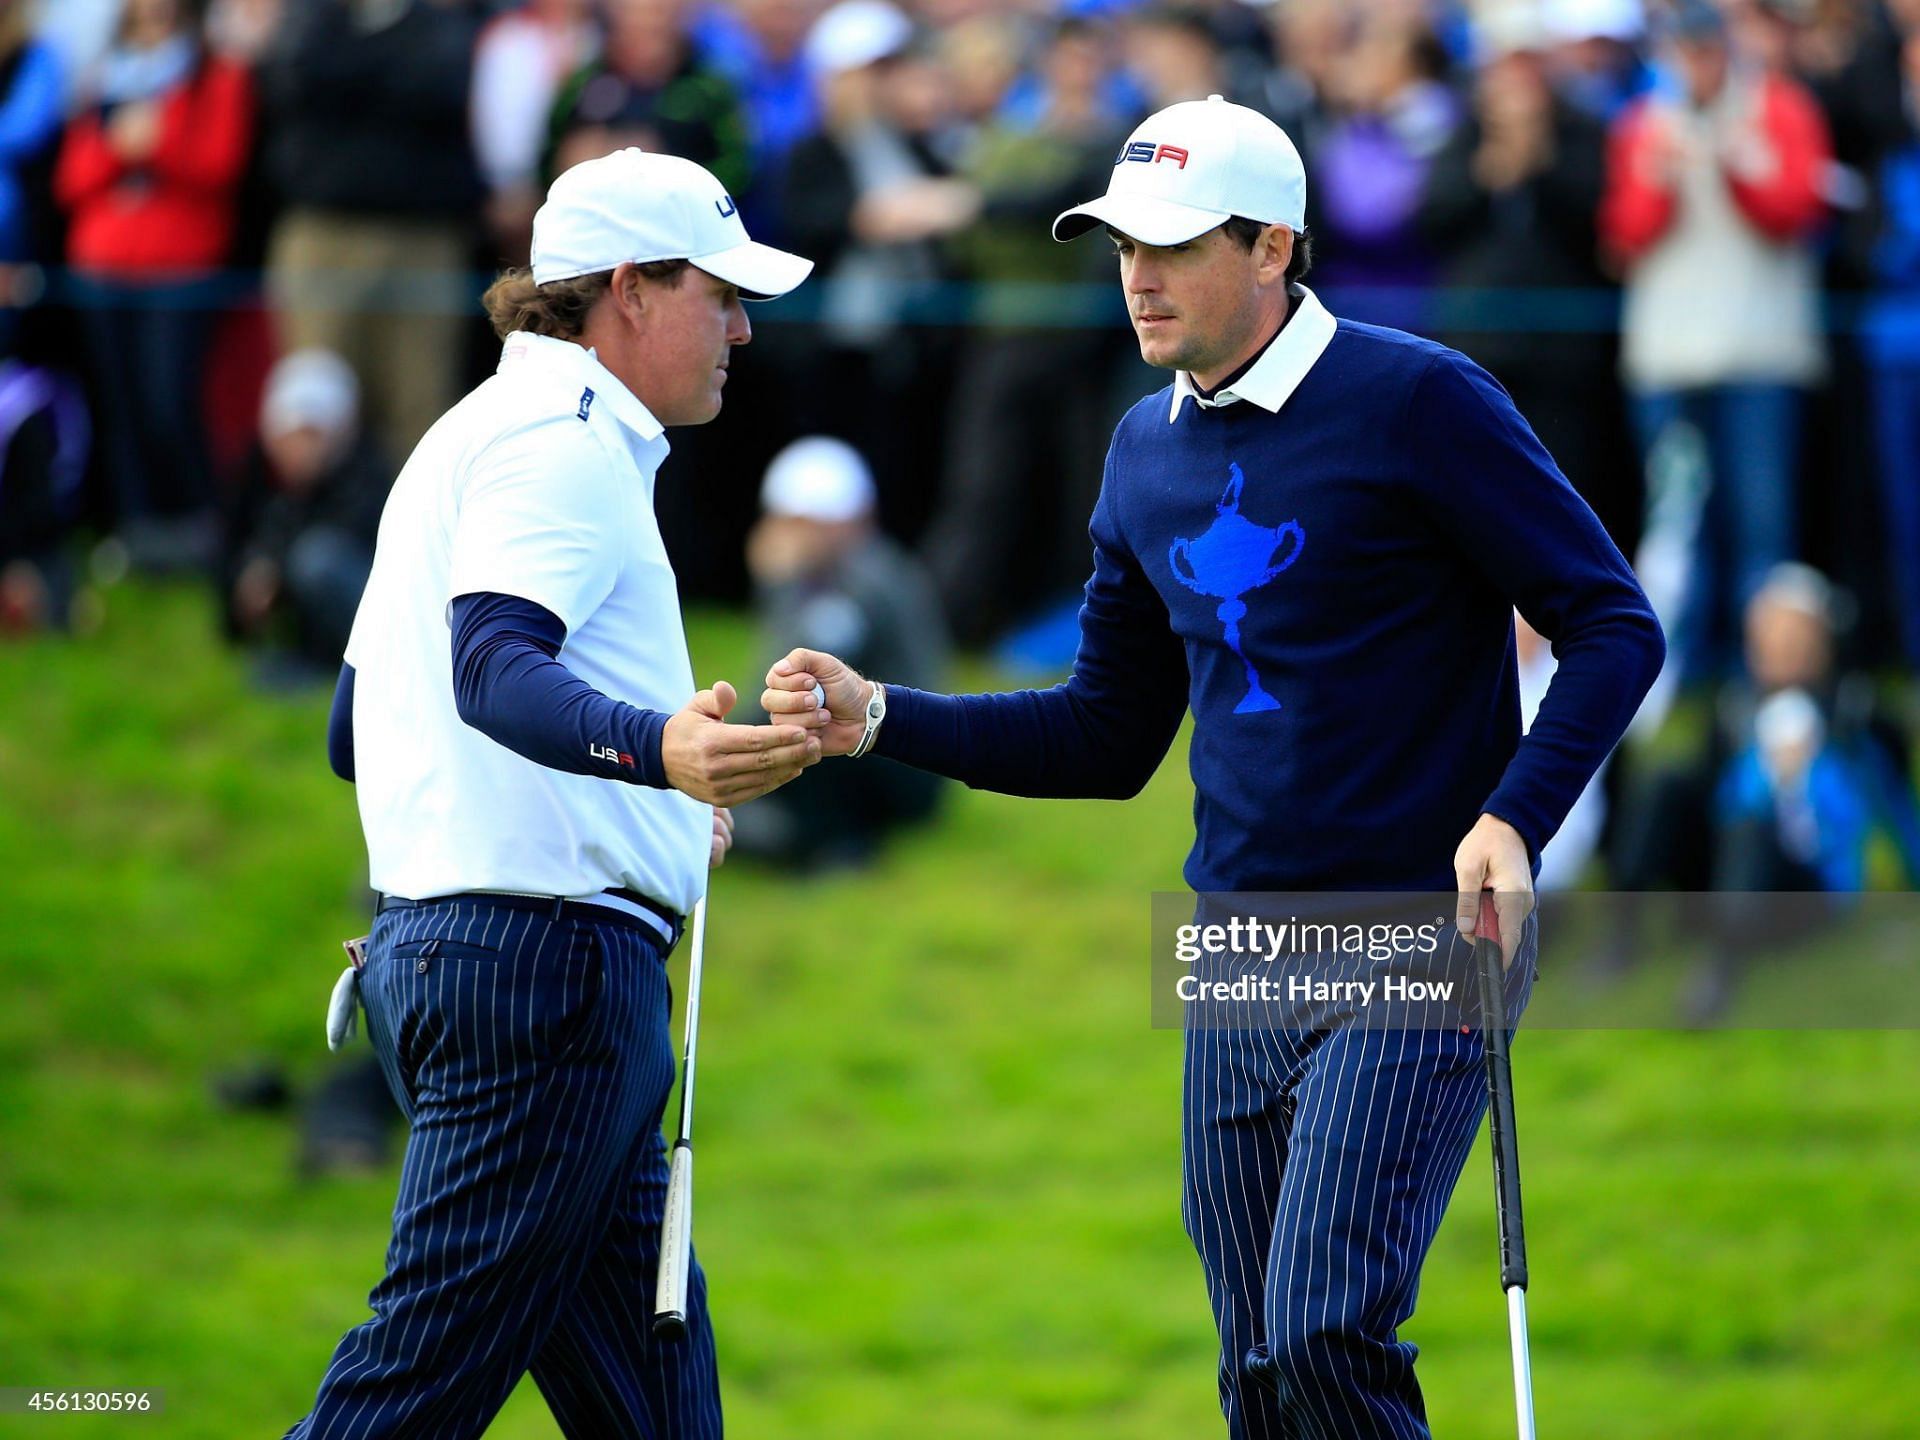 Phil Mickelson and Keegan Bradley in the 2014 Ryder Cup (Image via Getty)